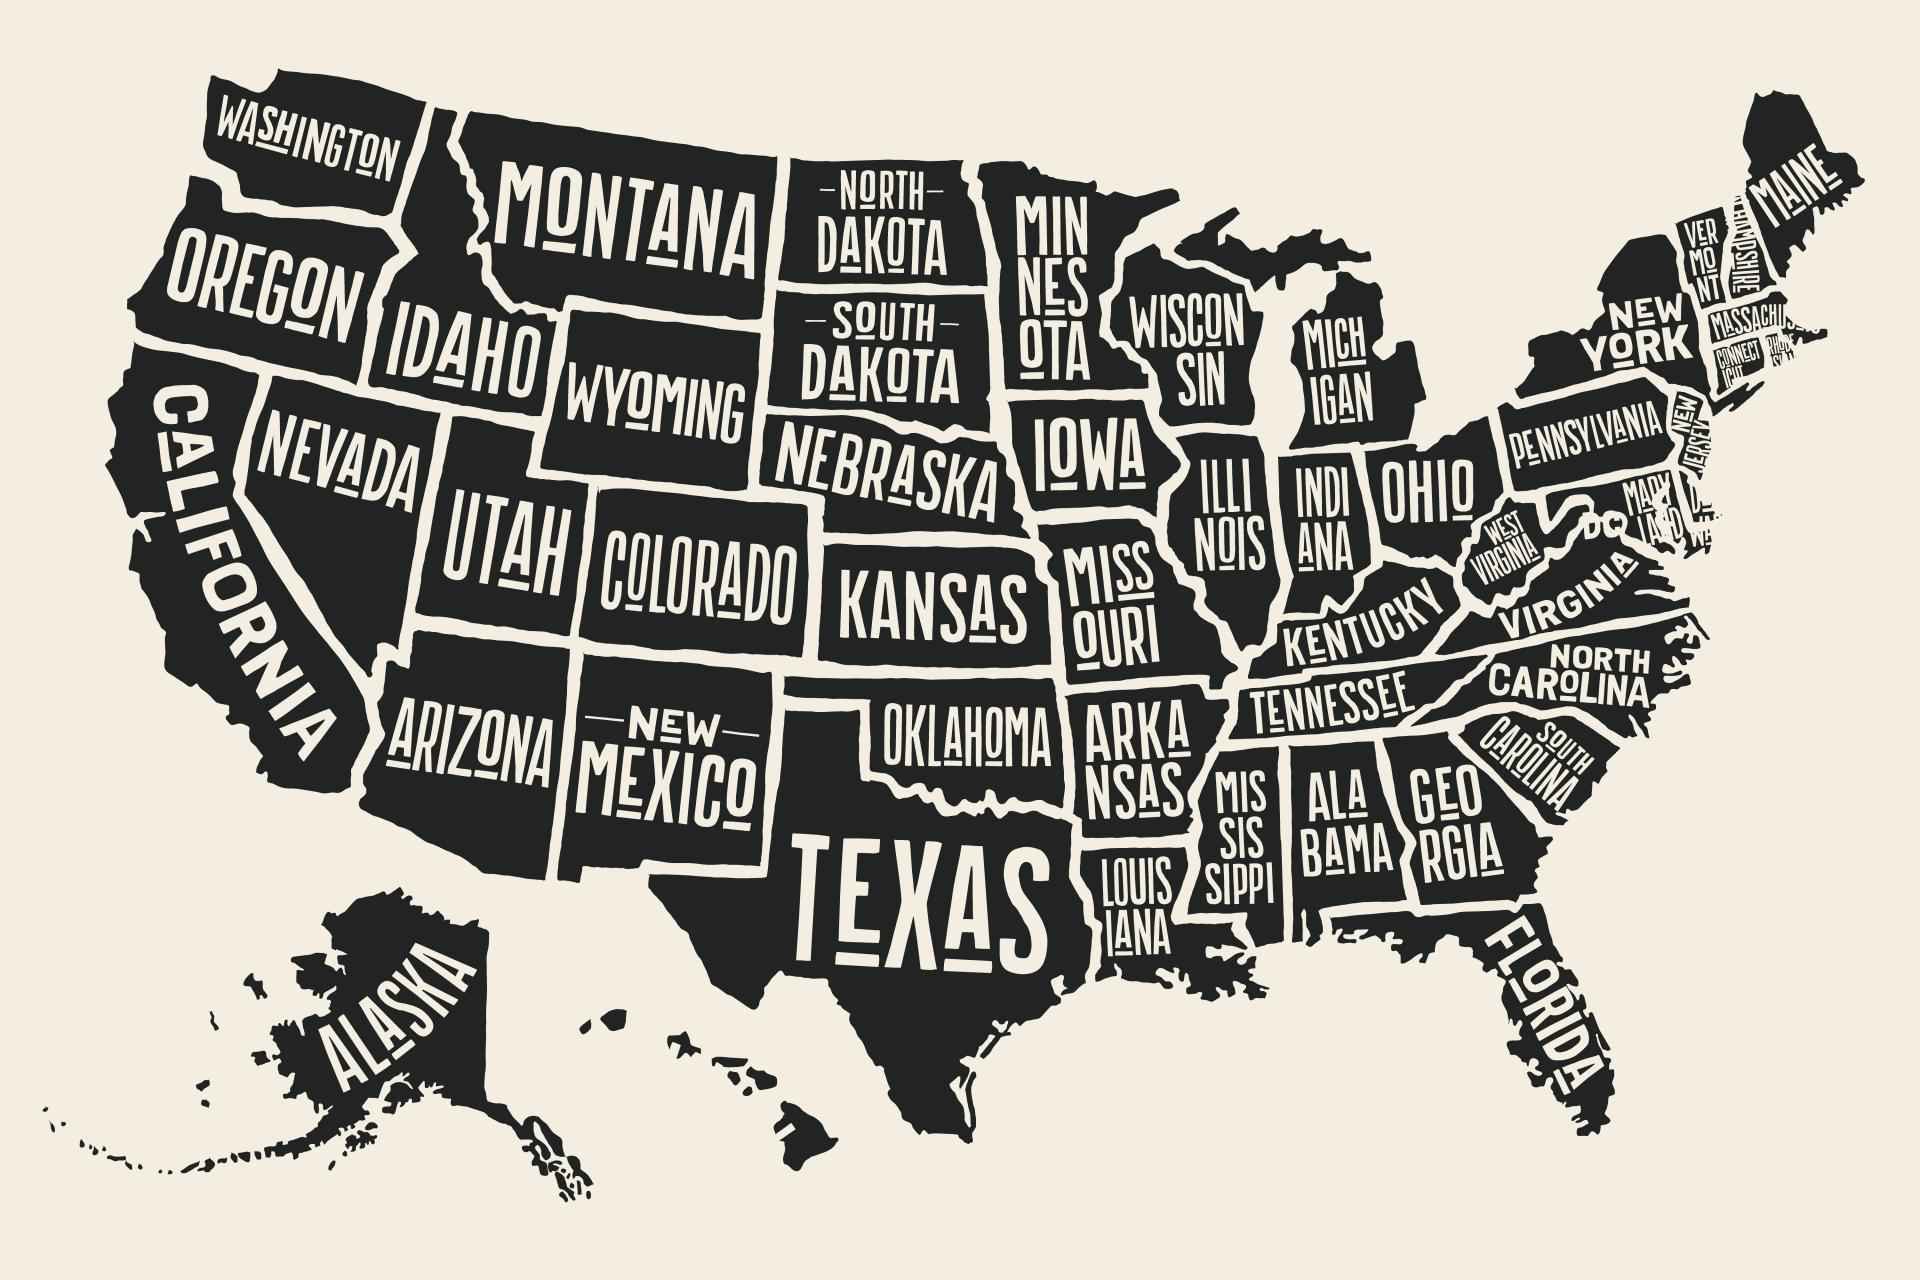 The Most Liberal States, Cities, and Countries